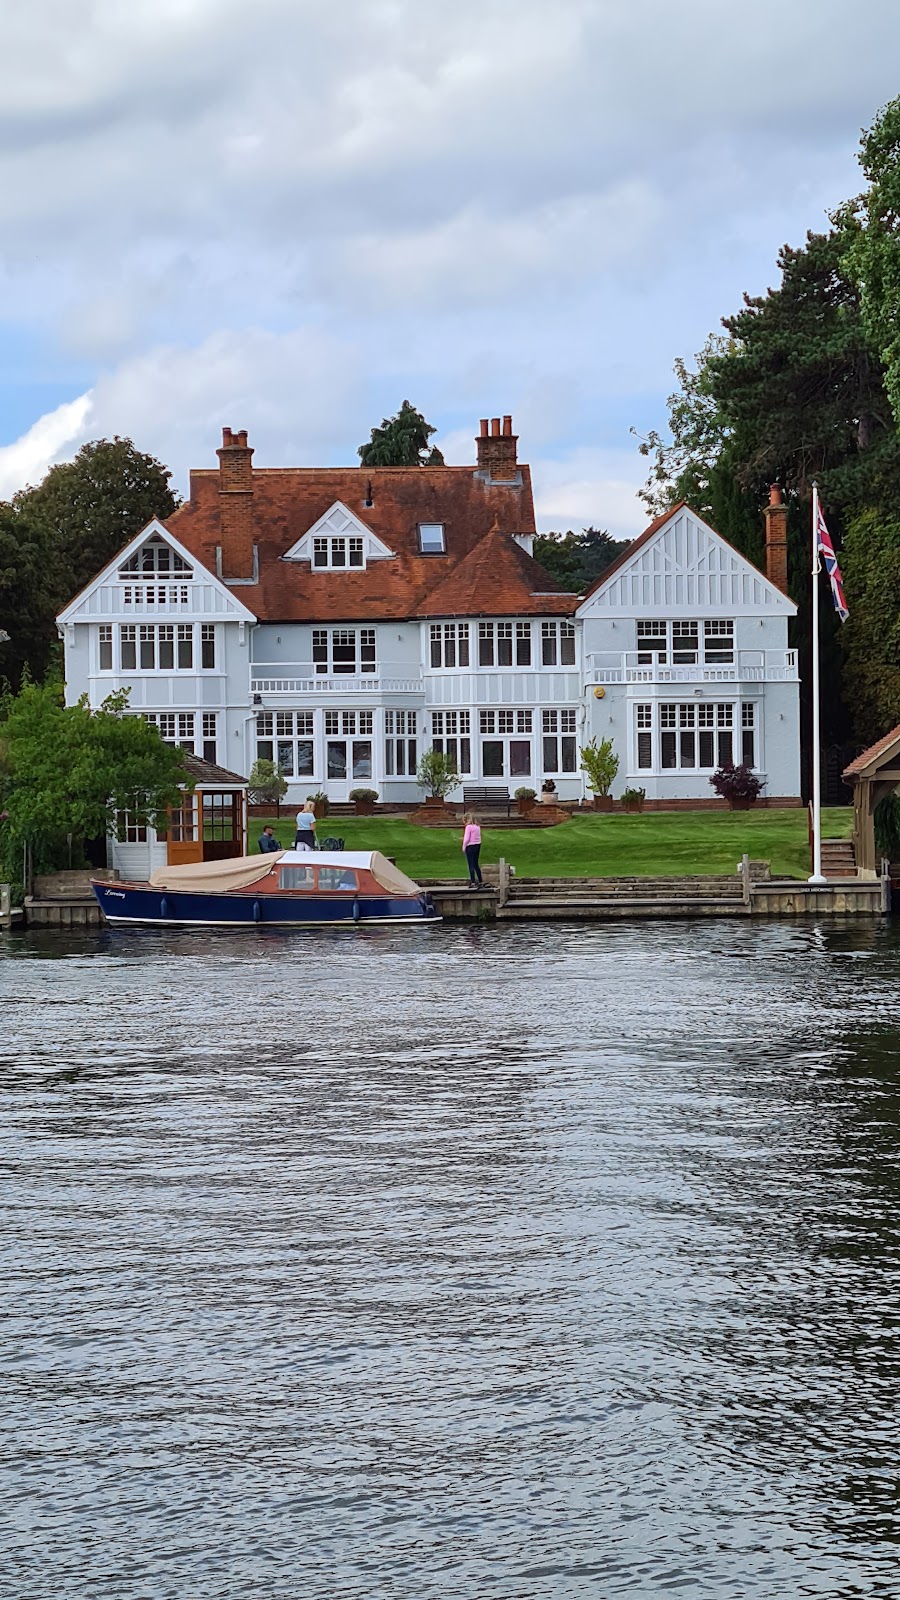 https://whatremovals.co.uk/wp-content/uploads/2022/02/Henley on Thames-169x300.jpeg